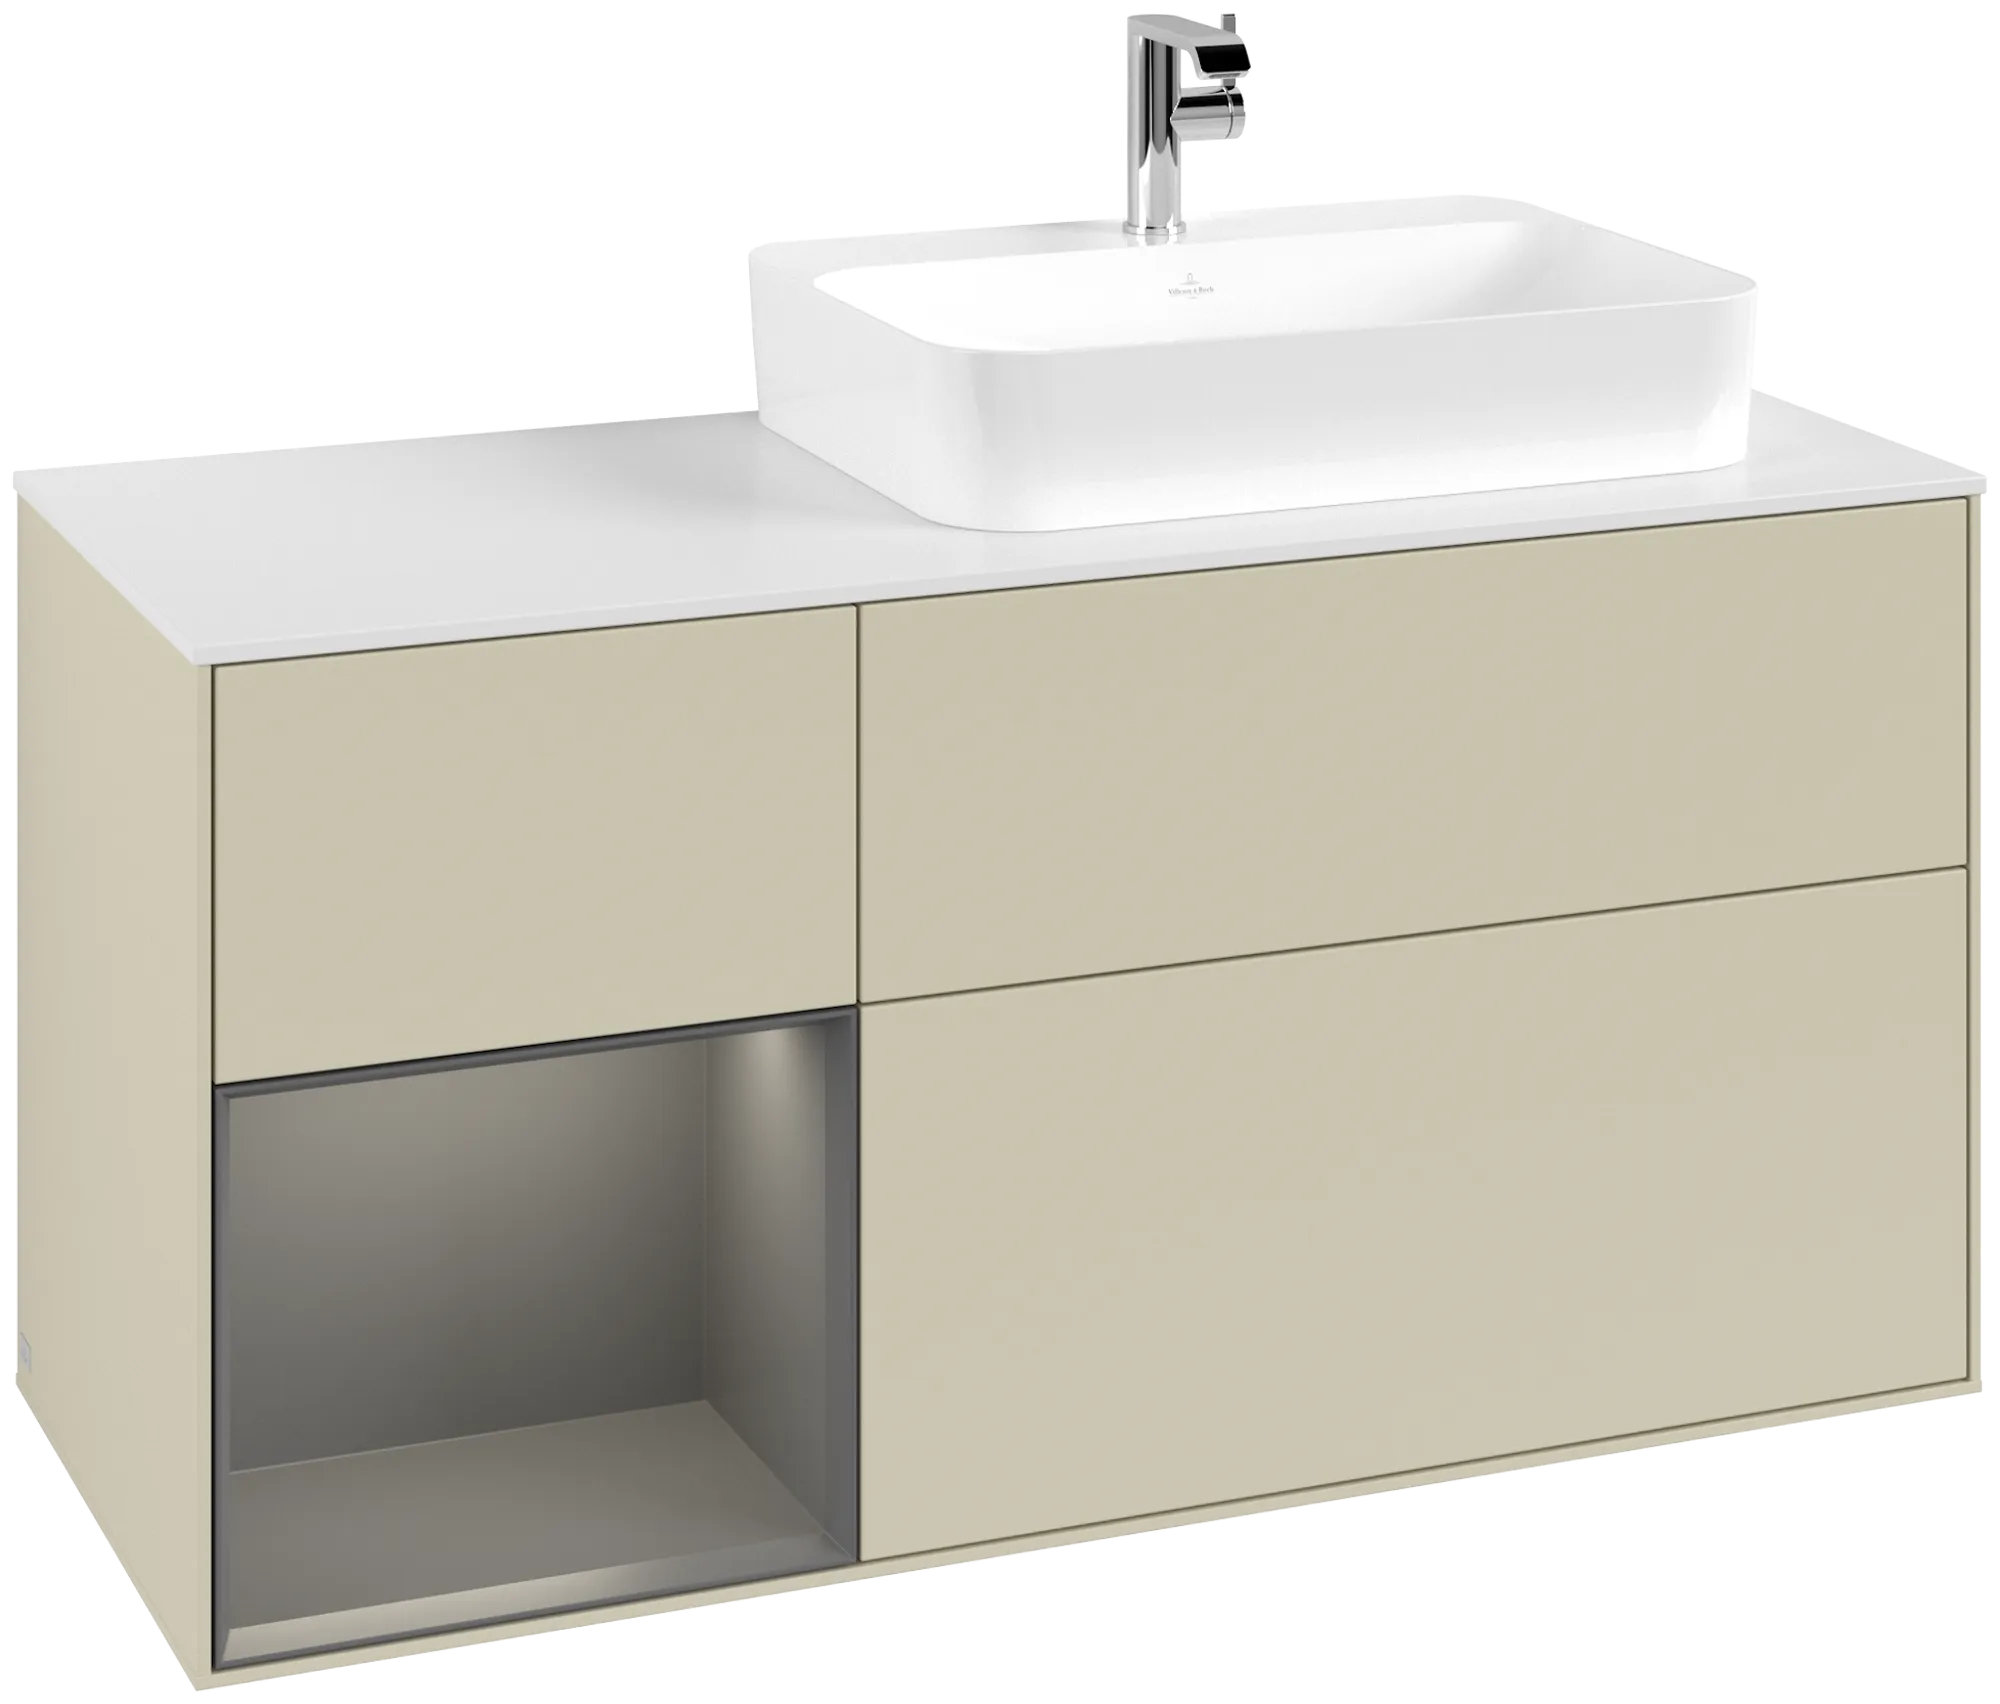 Obrázek VILLEROY BOCH Finion Vanity unit, with lighting, 3 pull-out compartments, 1200 x 603 x 501 mm, Silk Grey Matt Lacquer / Anthracite Matt Lacquer / Glass White Matt #G391GKHJ